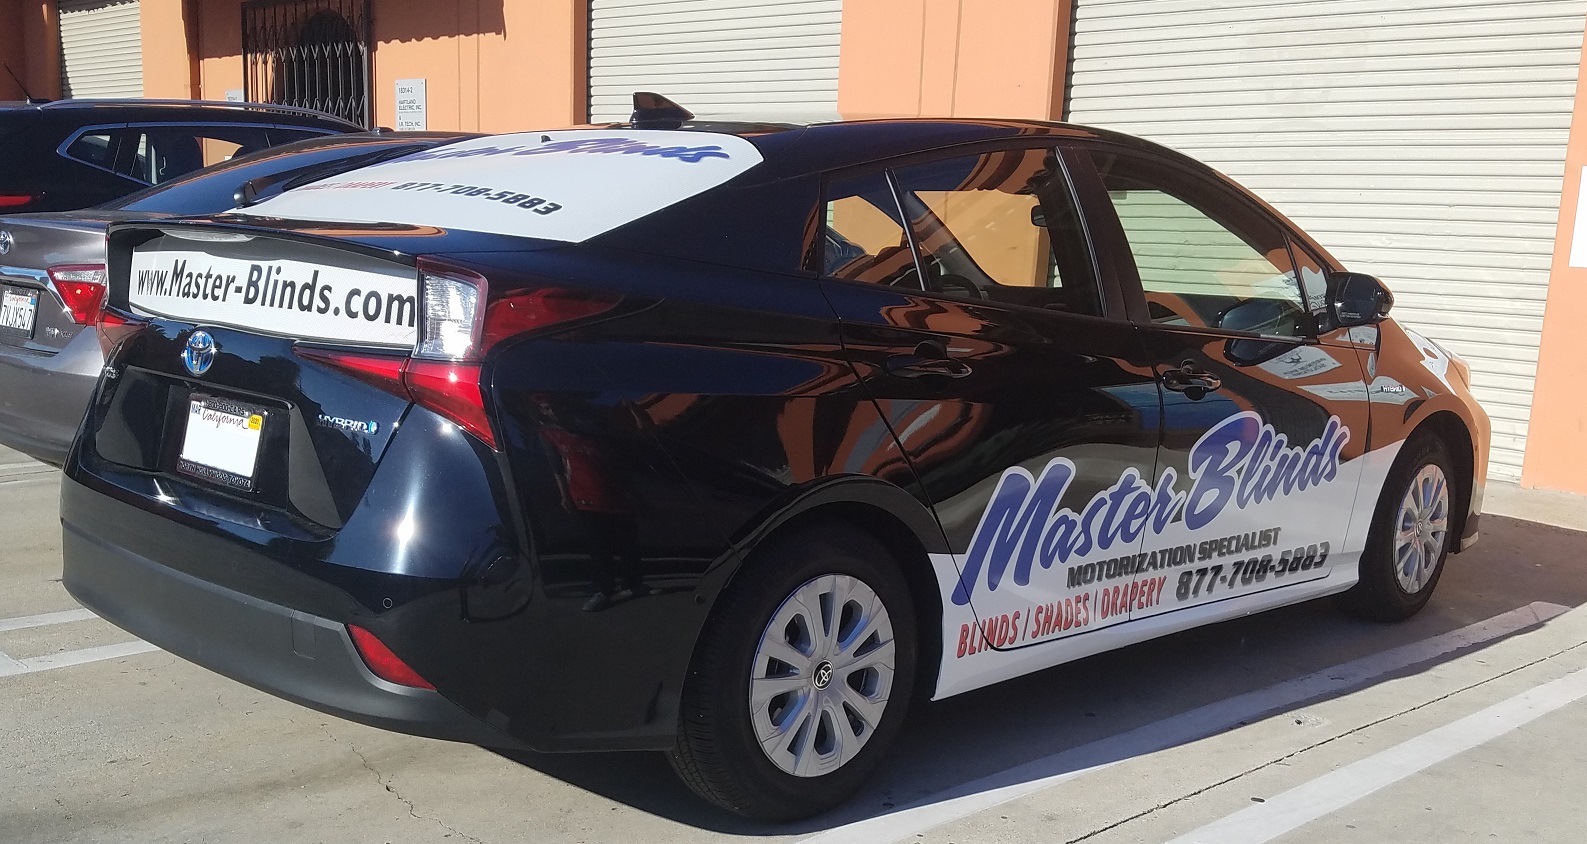 You are currently viewing Car Wrap for Master Blinds in Sherman Oaks